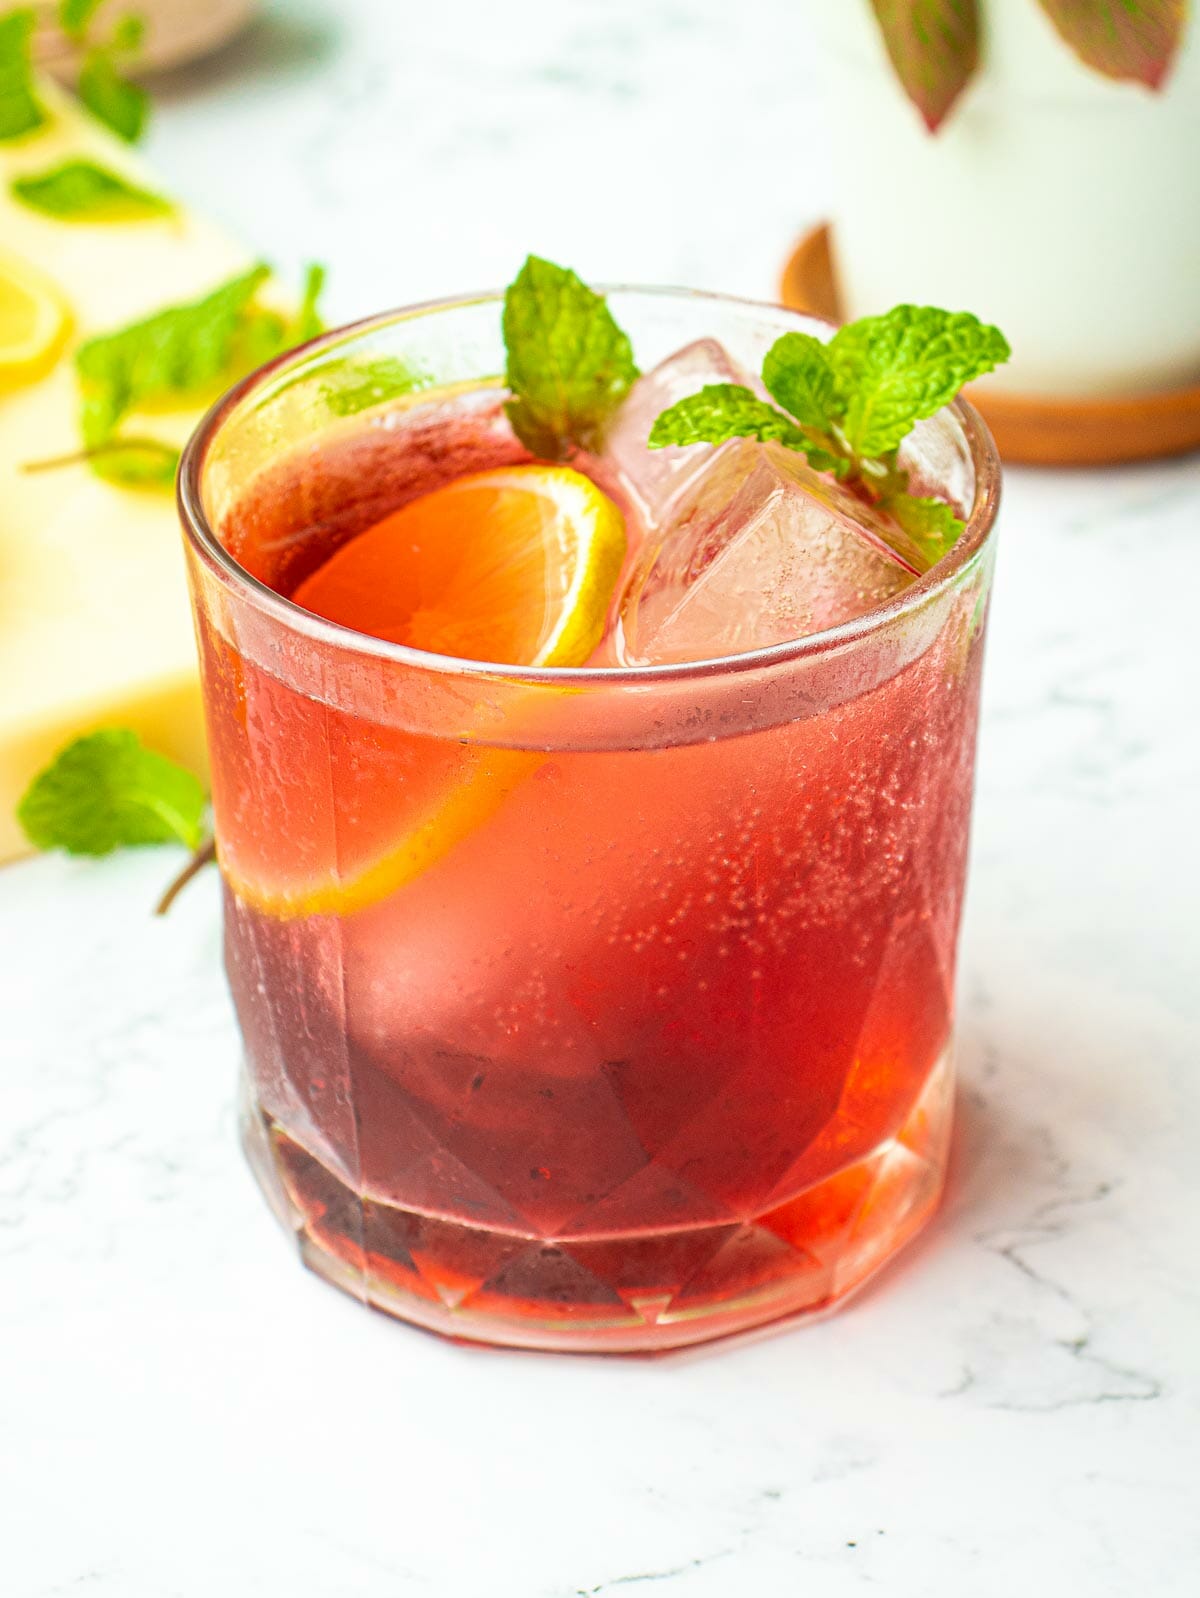 a glass of cranberry juice on ice and garnished with mint leaves and a slice of lemon